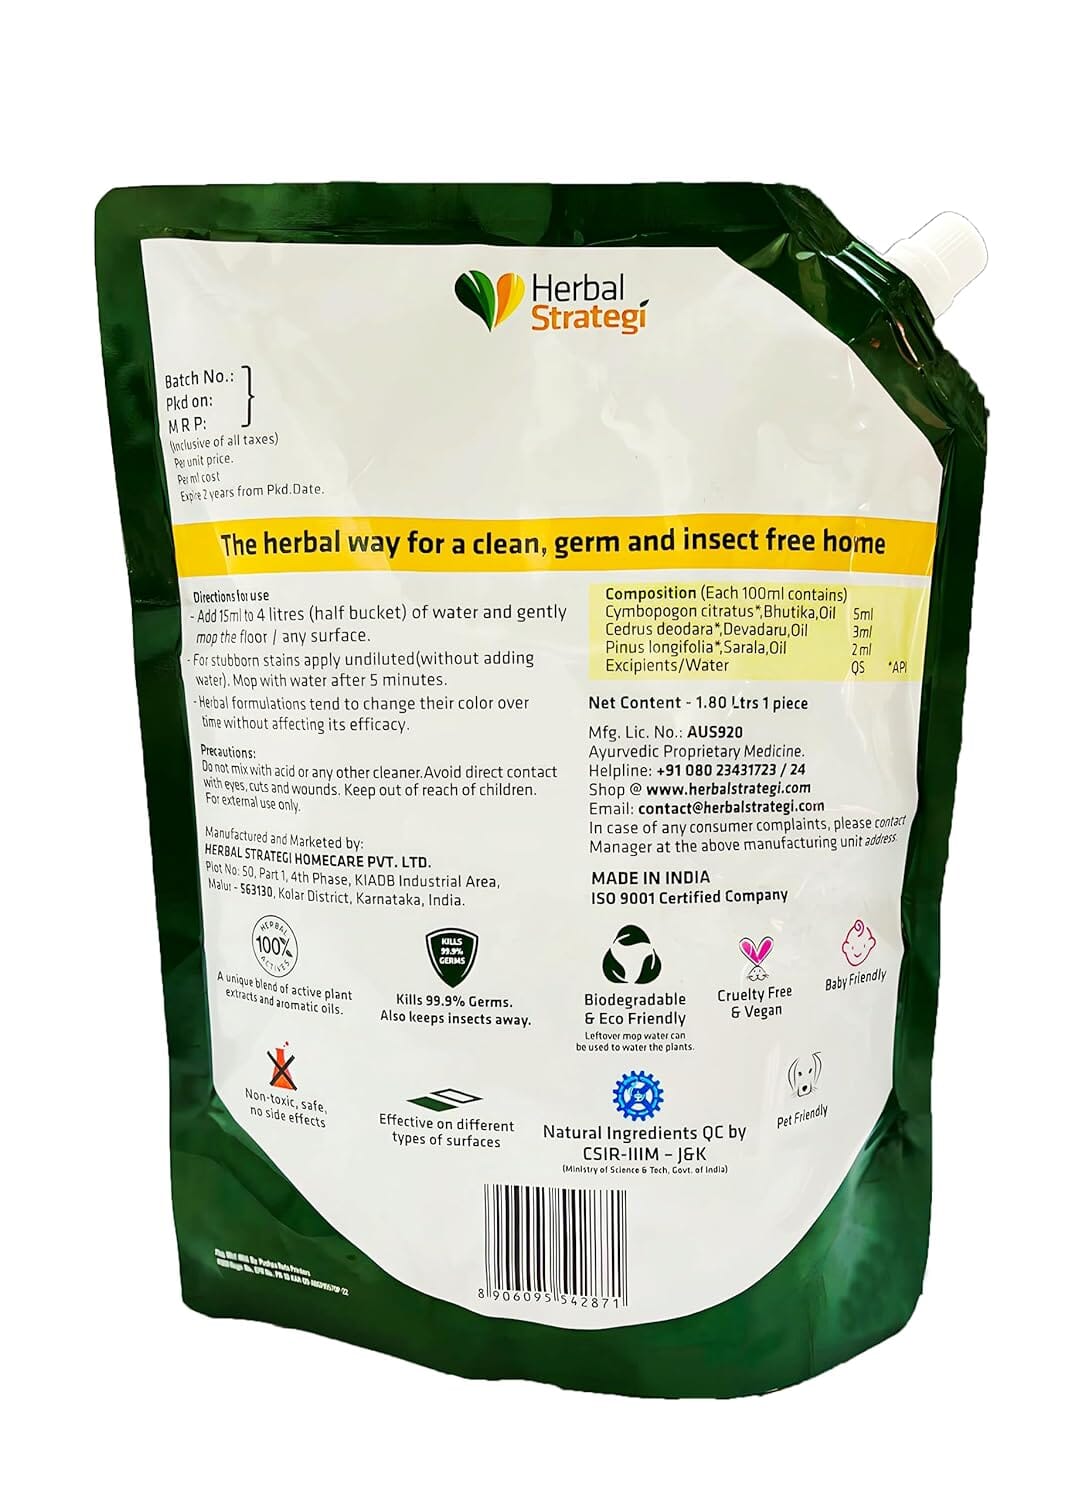 Herbal Strategi Floor Cleaner Disinfectant and Insect Repellent 1.8L Refill Pouch Cleaner Herbal Strategi